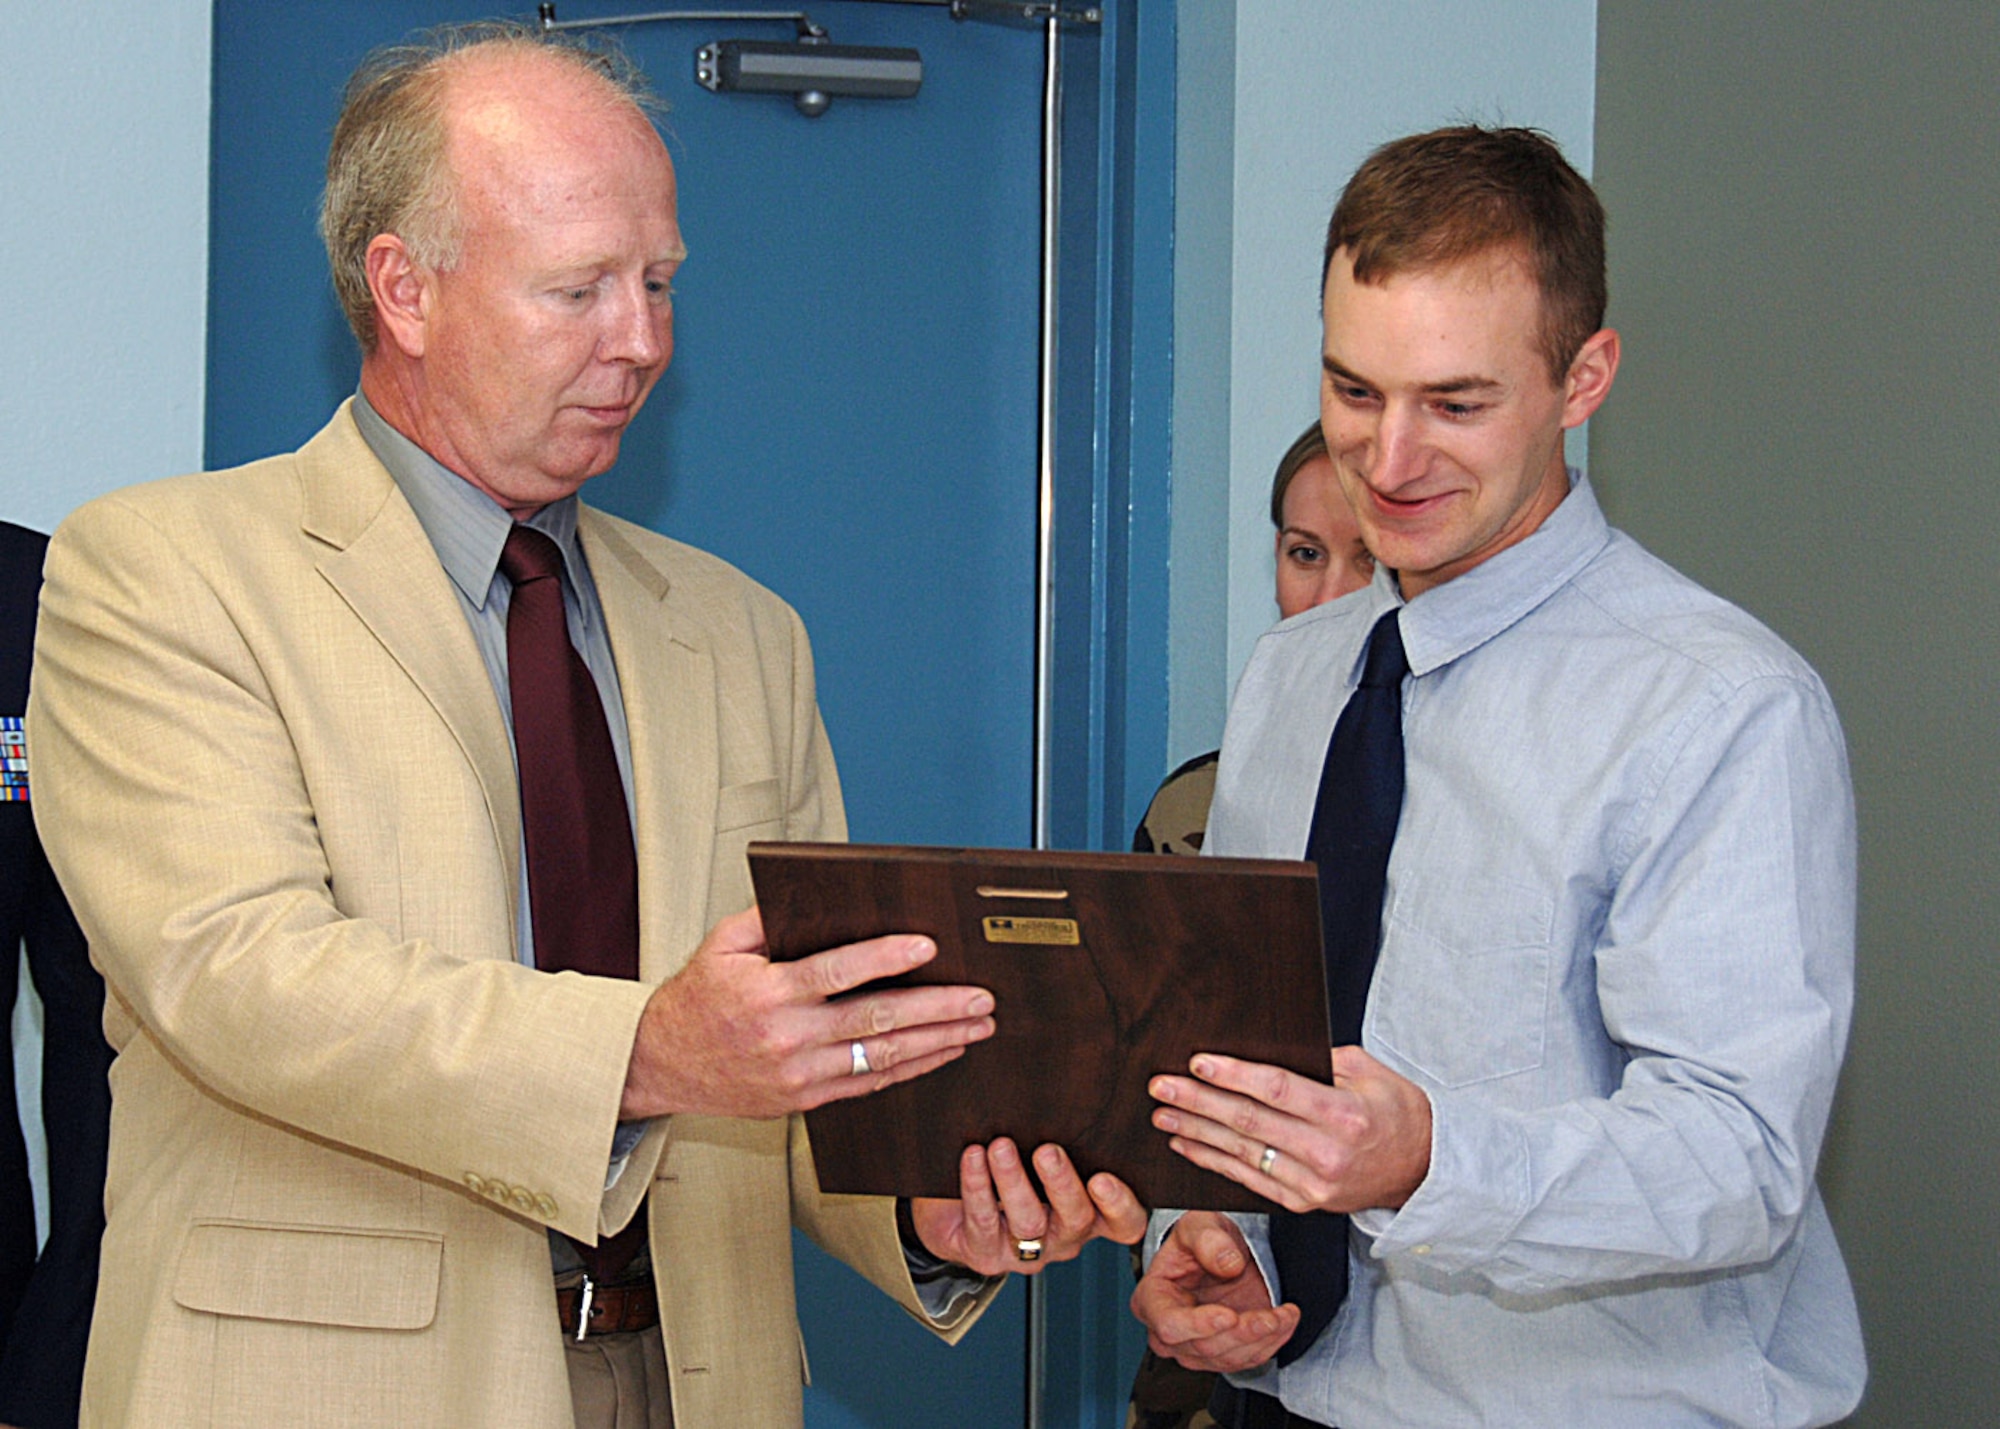 Artist Jacob Galey, husband of Capt. Lisa Mull a psychology resident with the 59th Medical Operations Squadron, receives a plaque from retired Maj. Ron Little at Camp Rissington, on Lackland Air Force Base, Texas, April 24. The plaque thanked Mr. Galey for his work on the Air Force Medical Service mural he painted on the Medical Unit Readiness Training site classroom wall for the 59th MDW Readiness Division. The mural depicts the past, present and future of the medical corps. (U.S. Air Force photo/Staff Sgt. Ruth Stanley)